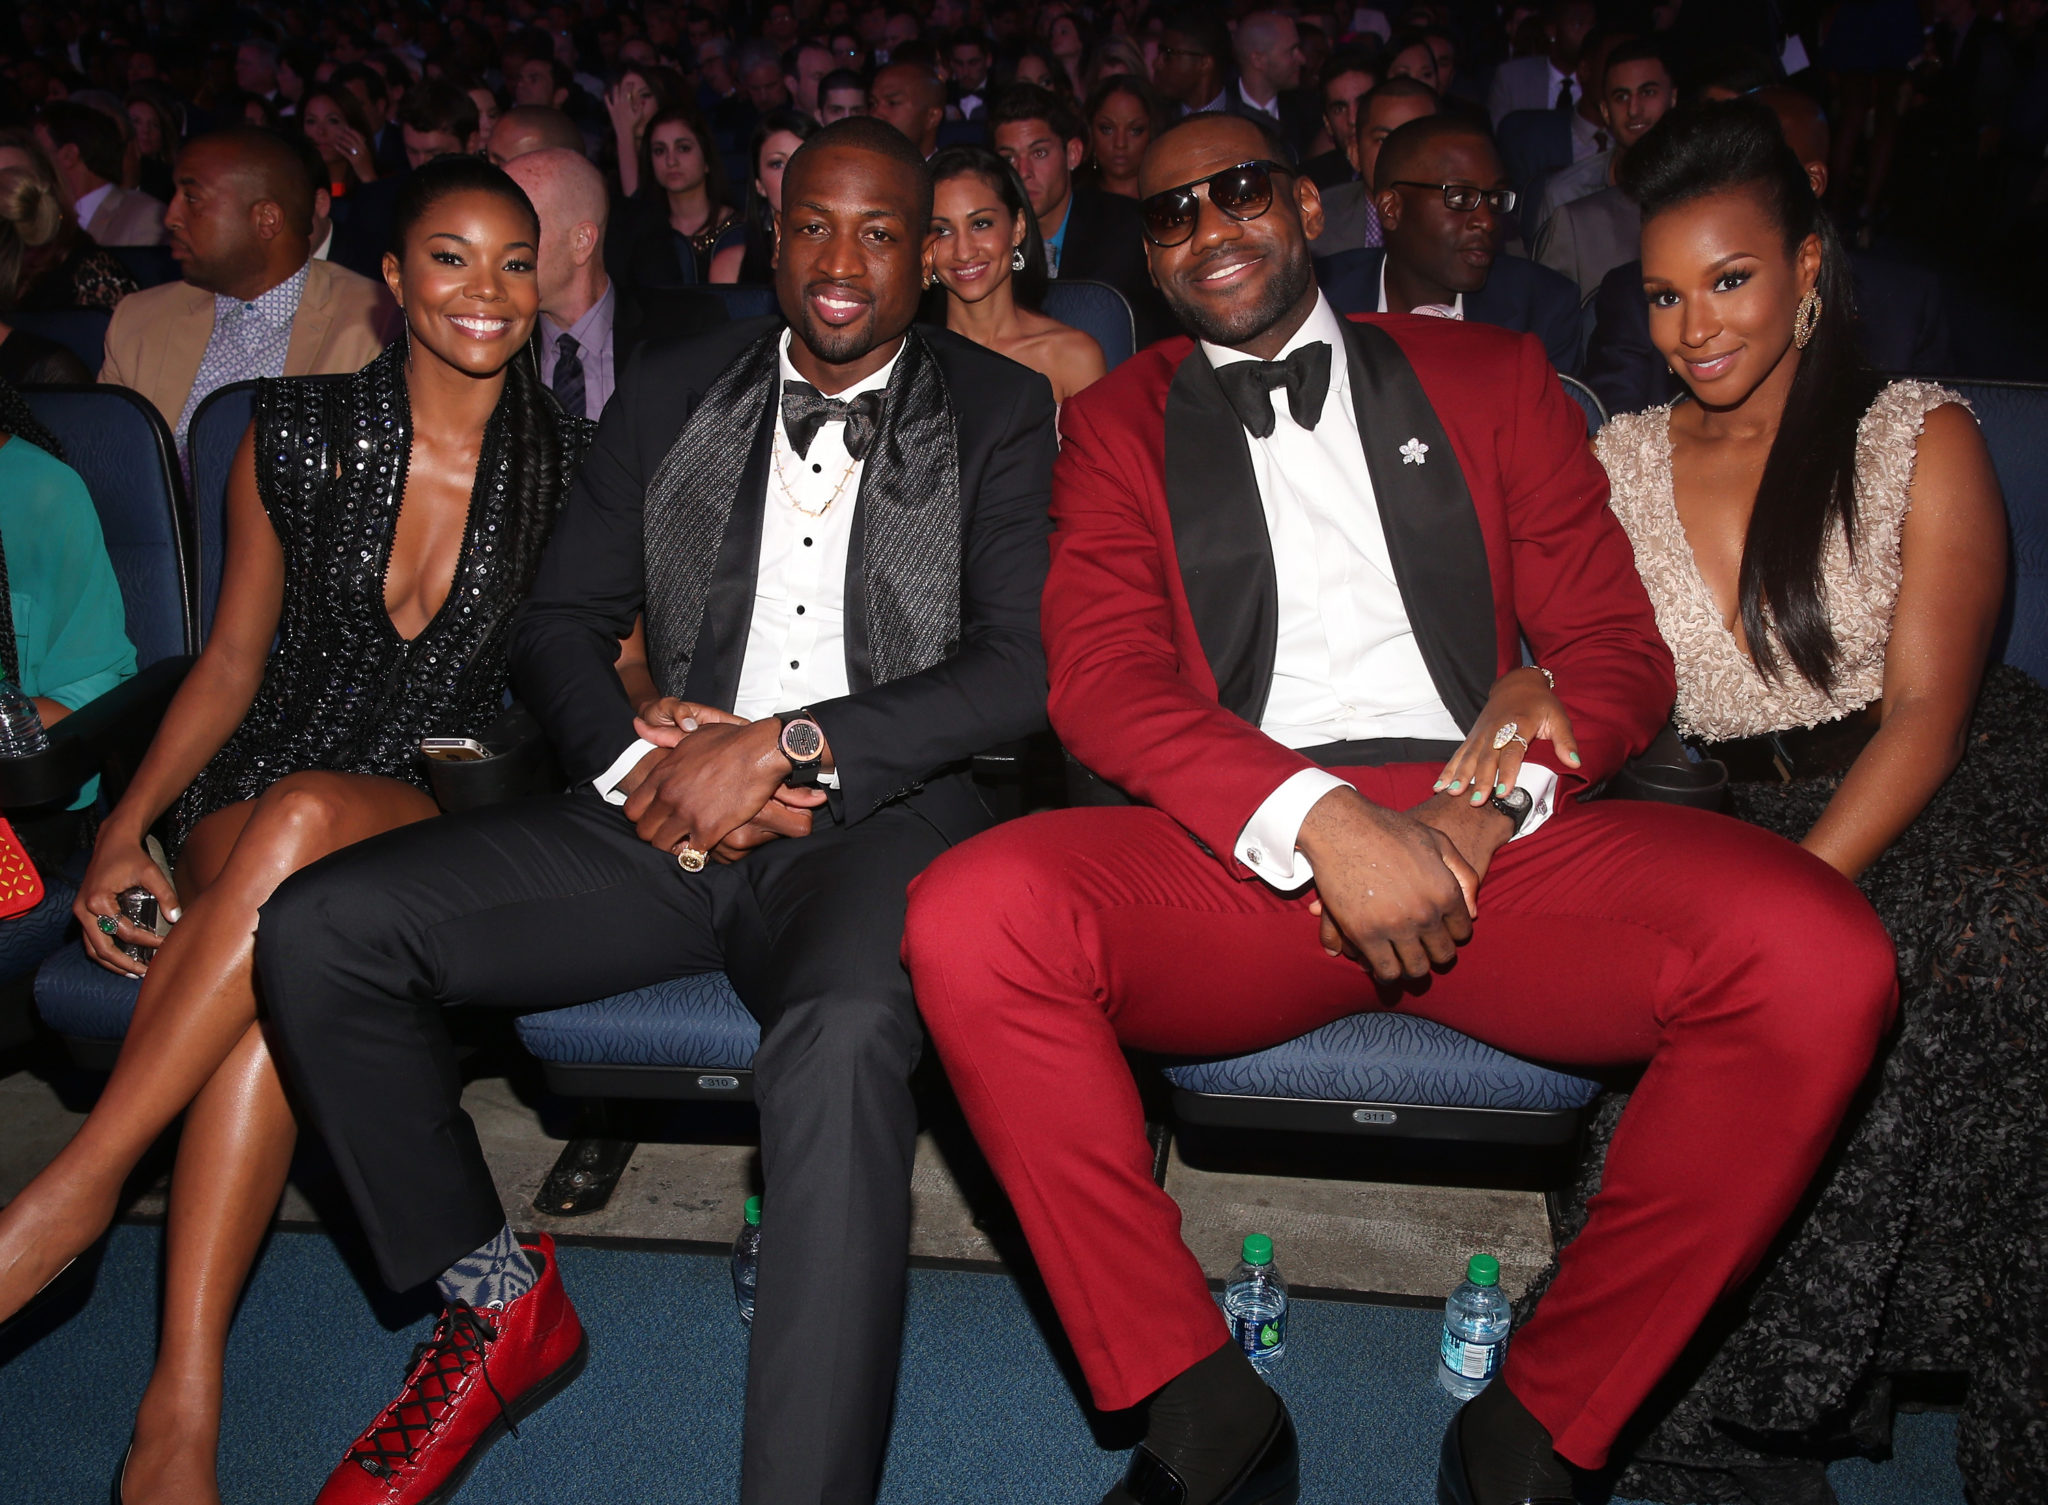 LeBron James and Kyrie Irving Bros Out With Dwyane Wade - Cavs Nation2048 x 1505